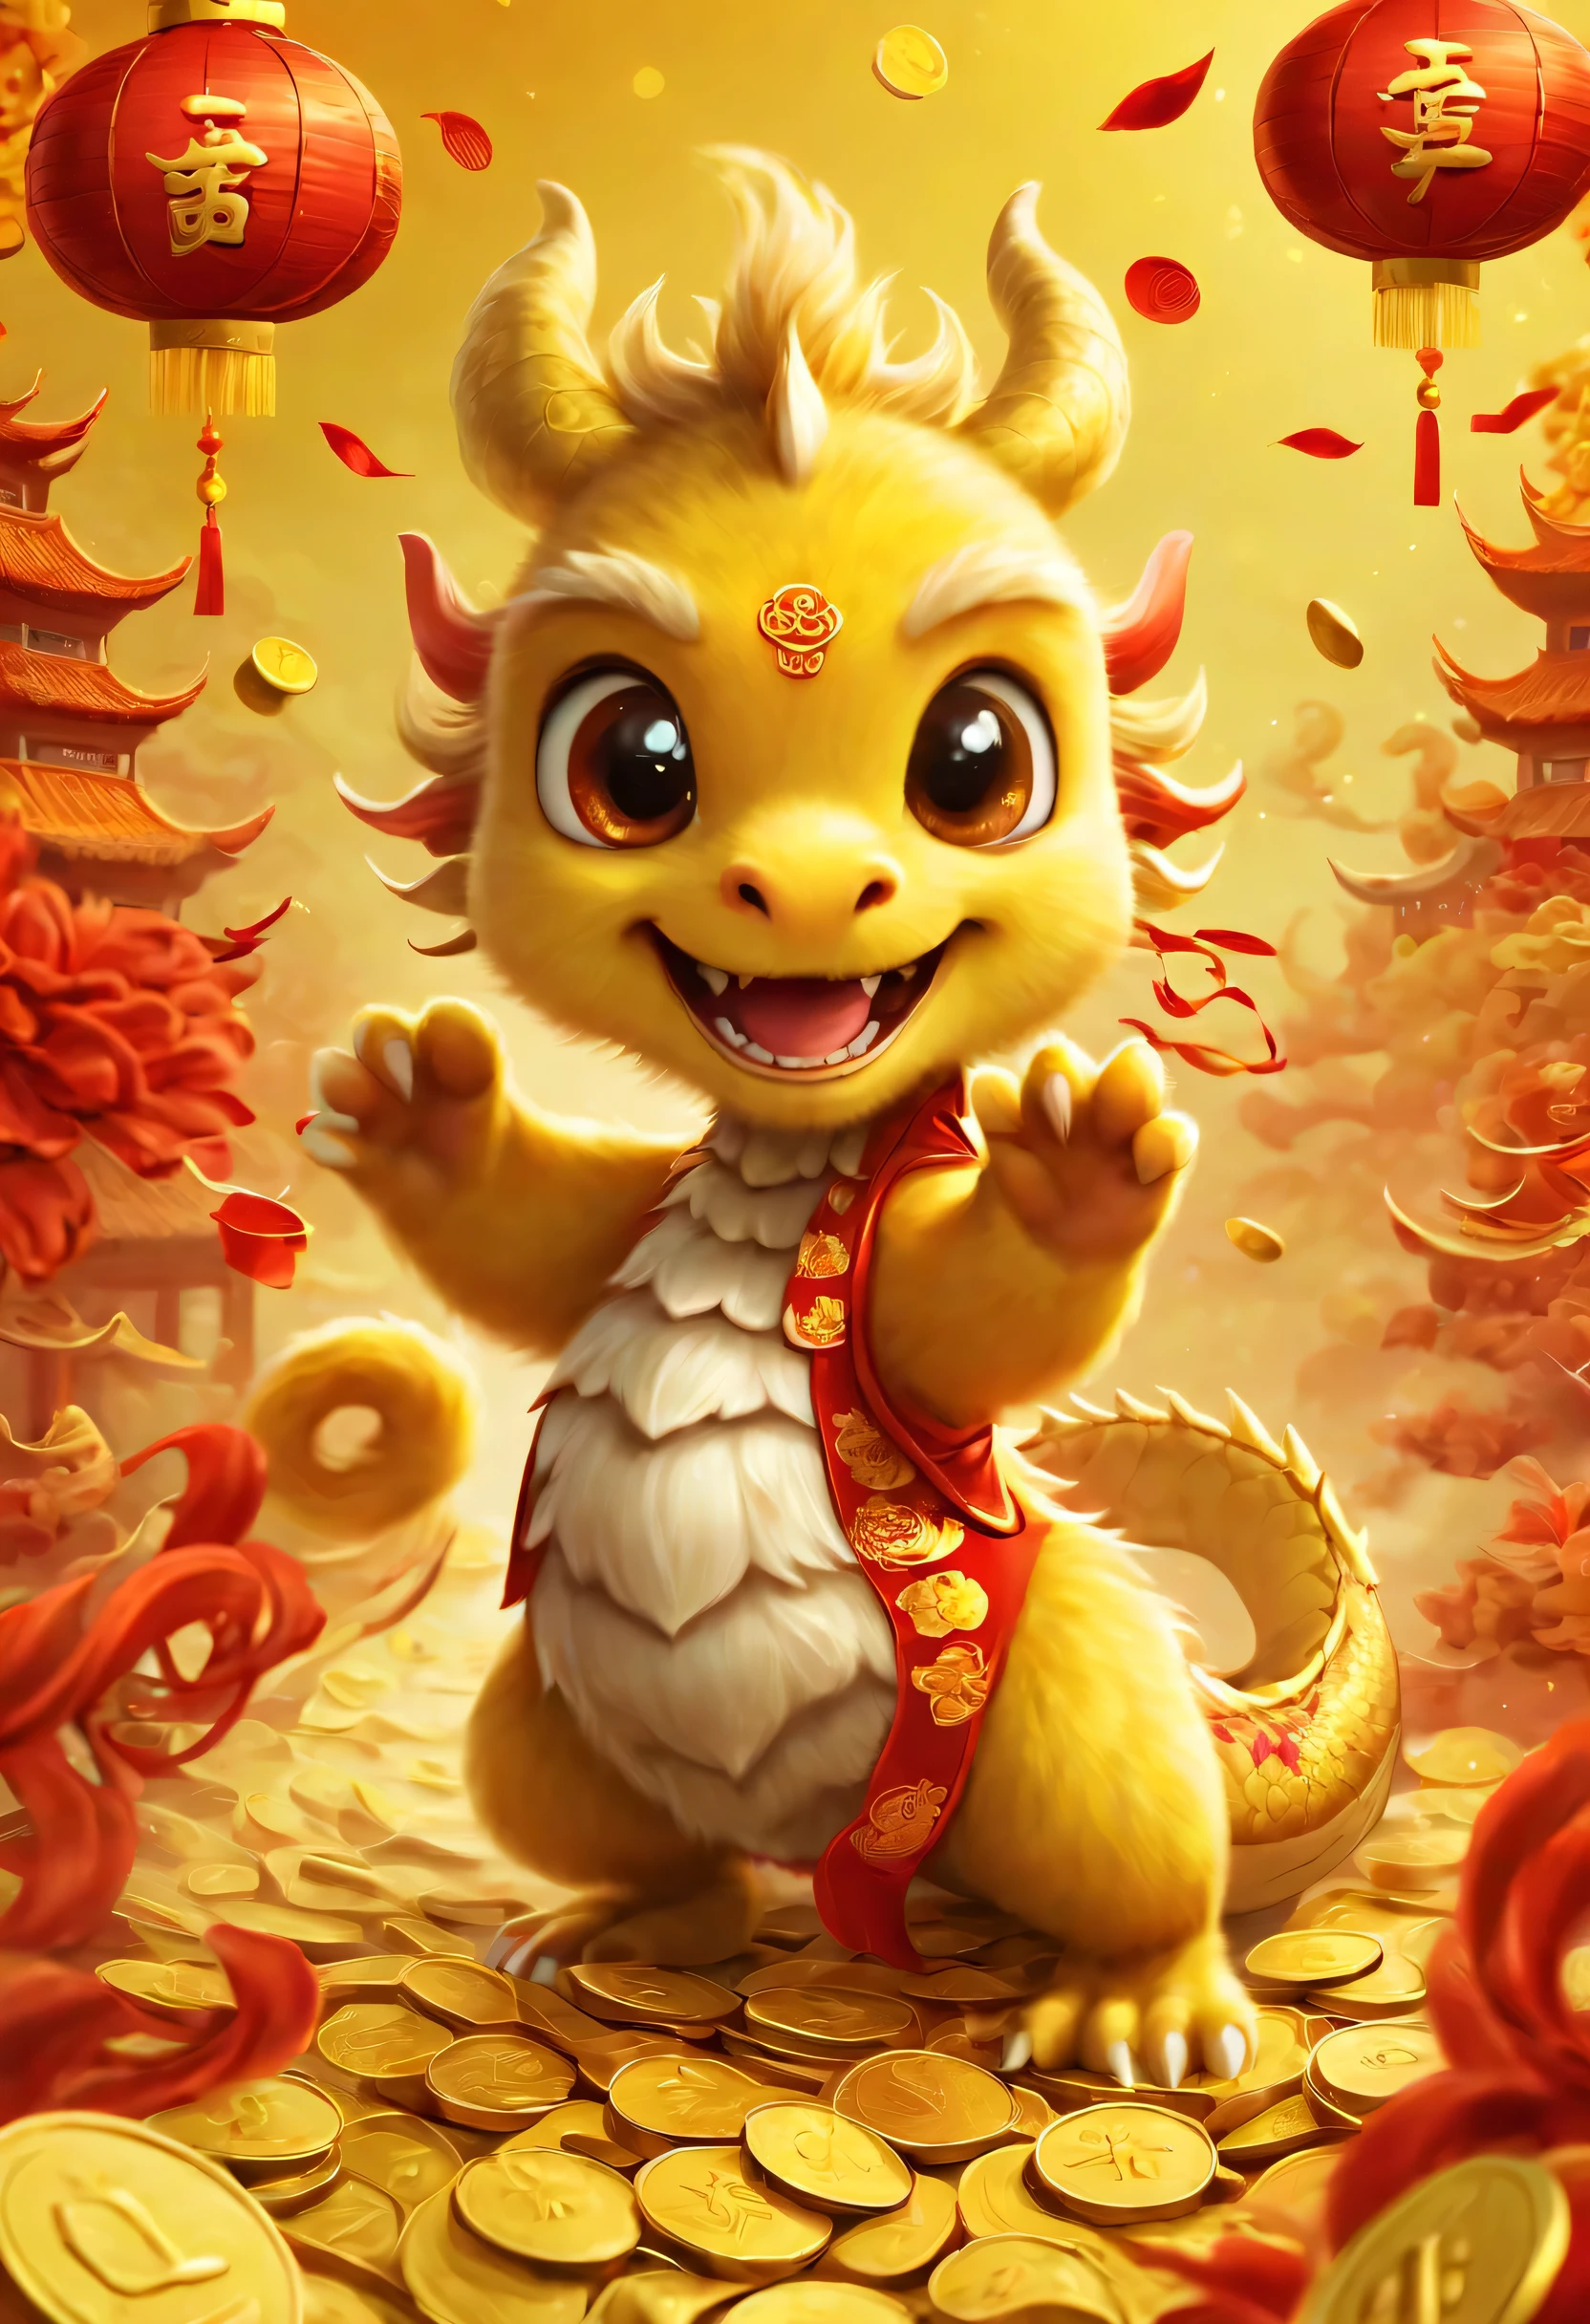 poster design：Chinese New Year is here，Cute little Chinese dragon so happy，hairy，purse，There are many gold coins in the air，Chinese element background blur，